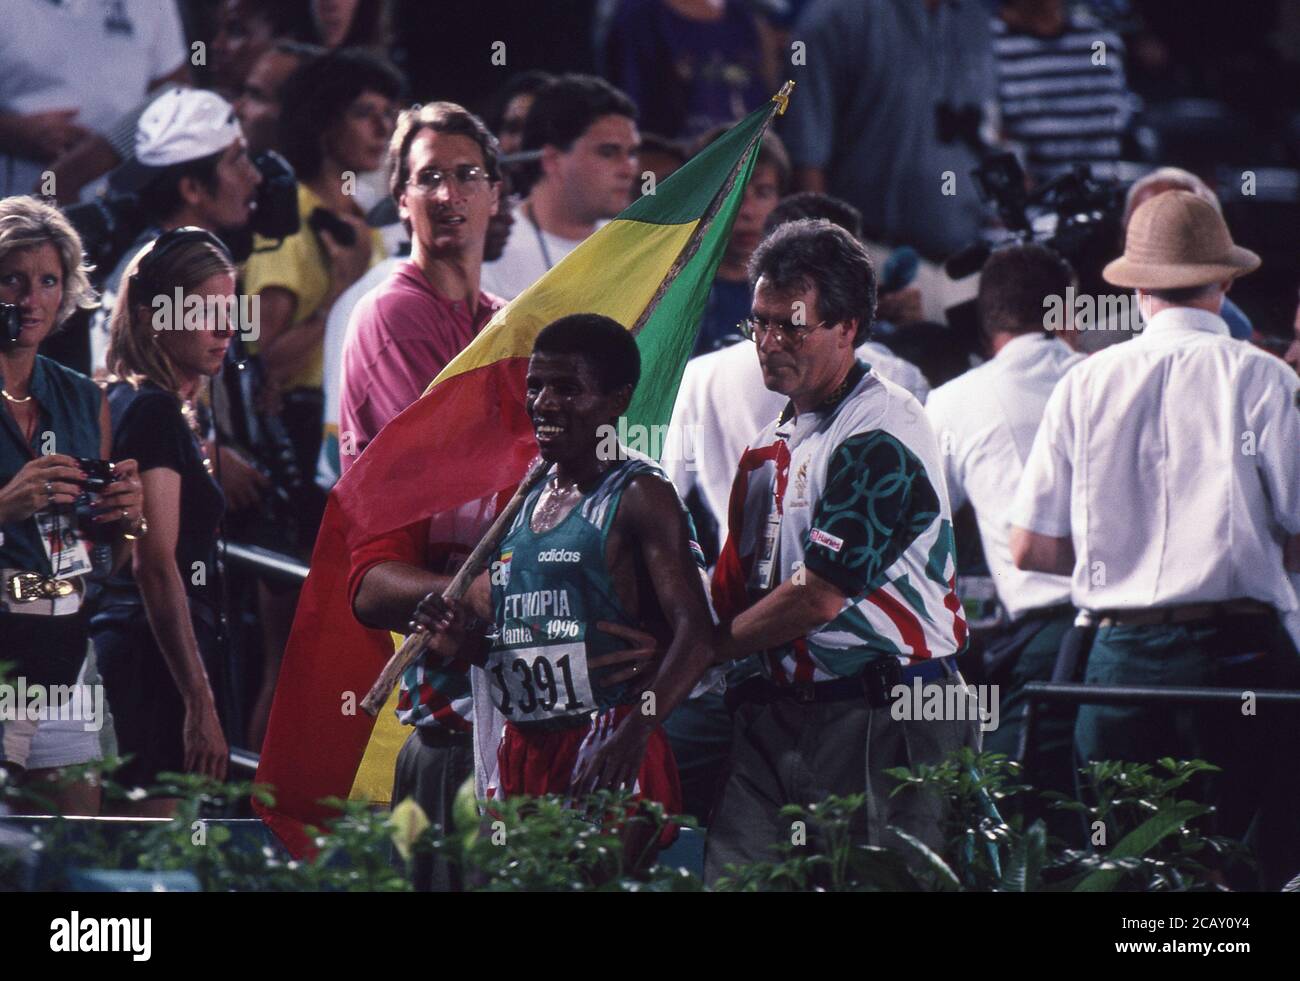 Atlanta, USA. 09th Aug, 2020. firo: 29.07.1996 Sports, Olympics, Summer Olympics, Summer Olympics, Olympic Games Olympics, Atlanta, 96, 1996, archive images, LA, athletics, men, men, 10,000 meter run Haile Gebrselassie. Ethiopia, half figure, wins, gold, and, with, its, flag, of, Ethiopia, after its run | usage worldwide Credit: dpa/Alamy Live News Stock Photo